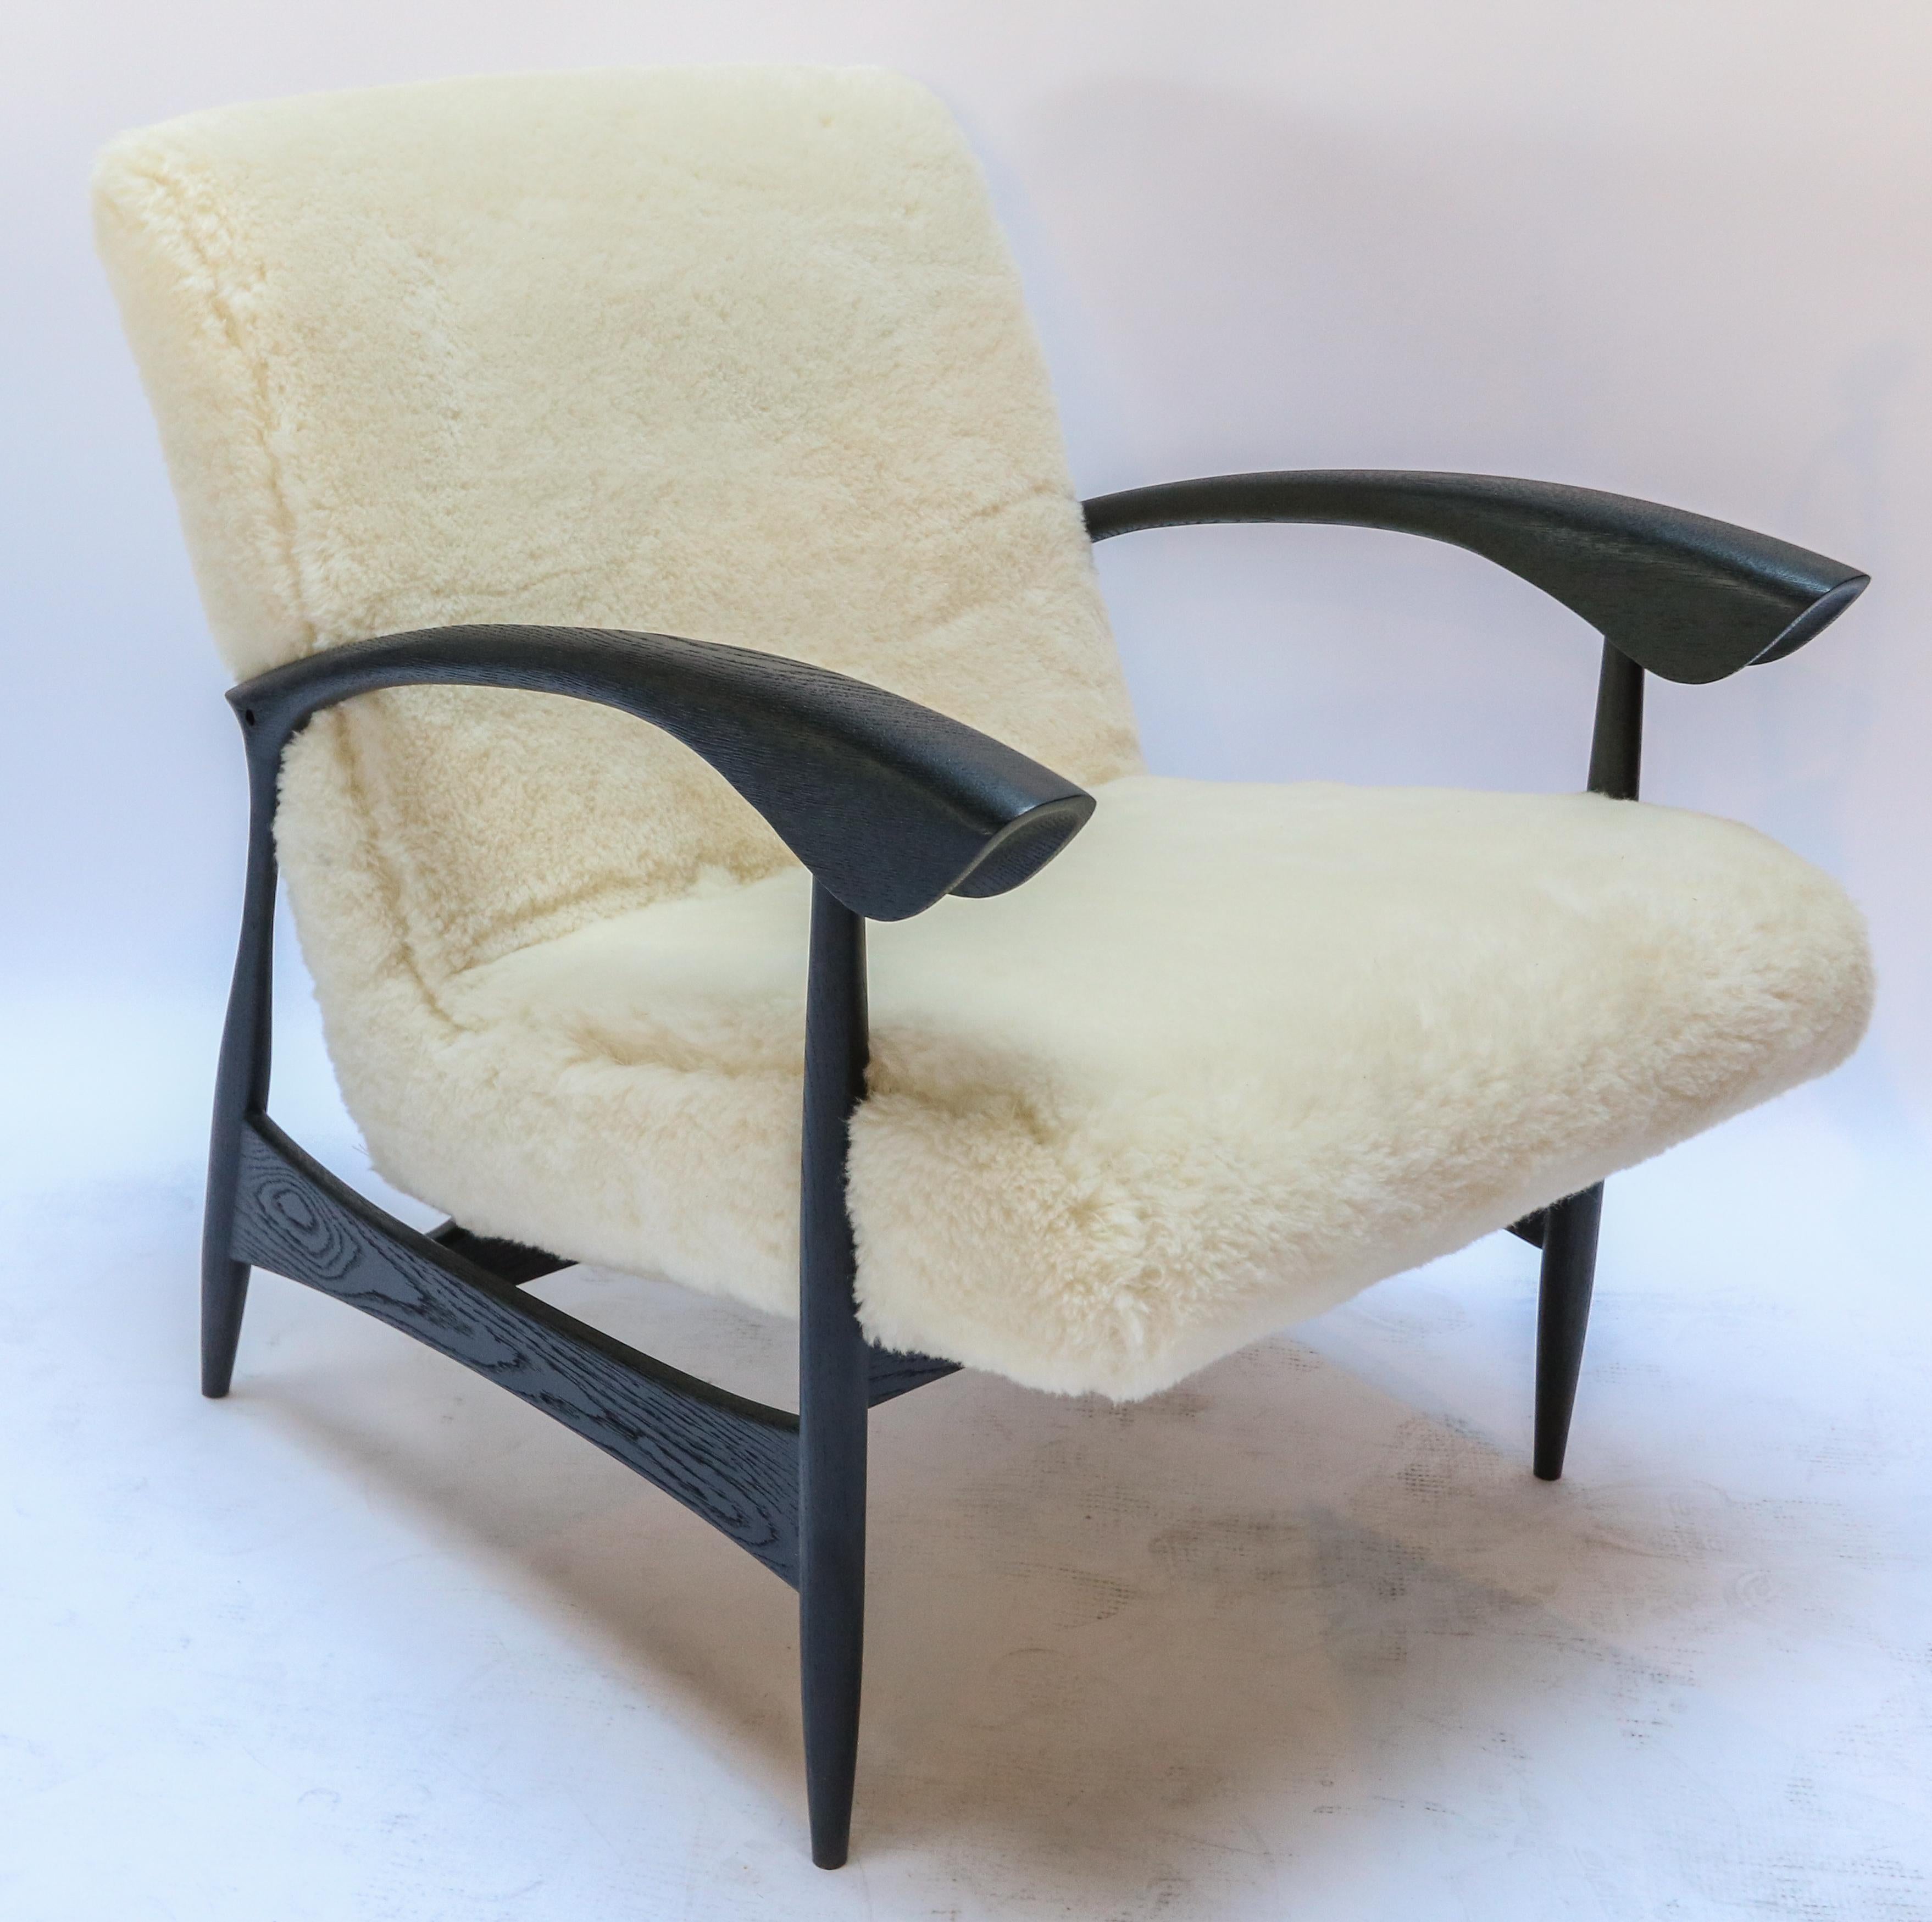 Pair of custom armchairs in black matte American oak and Italian ivory wool.  Made in Los Angeles by Adesso Imports. Can be done in different woods, finishes and fabrics.